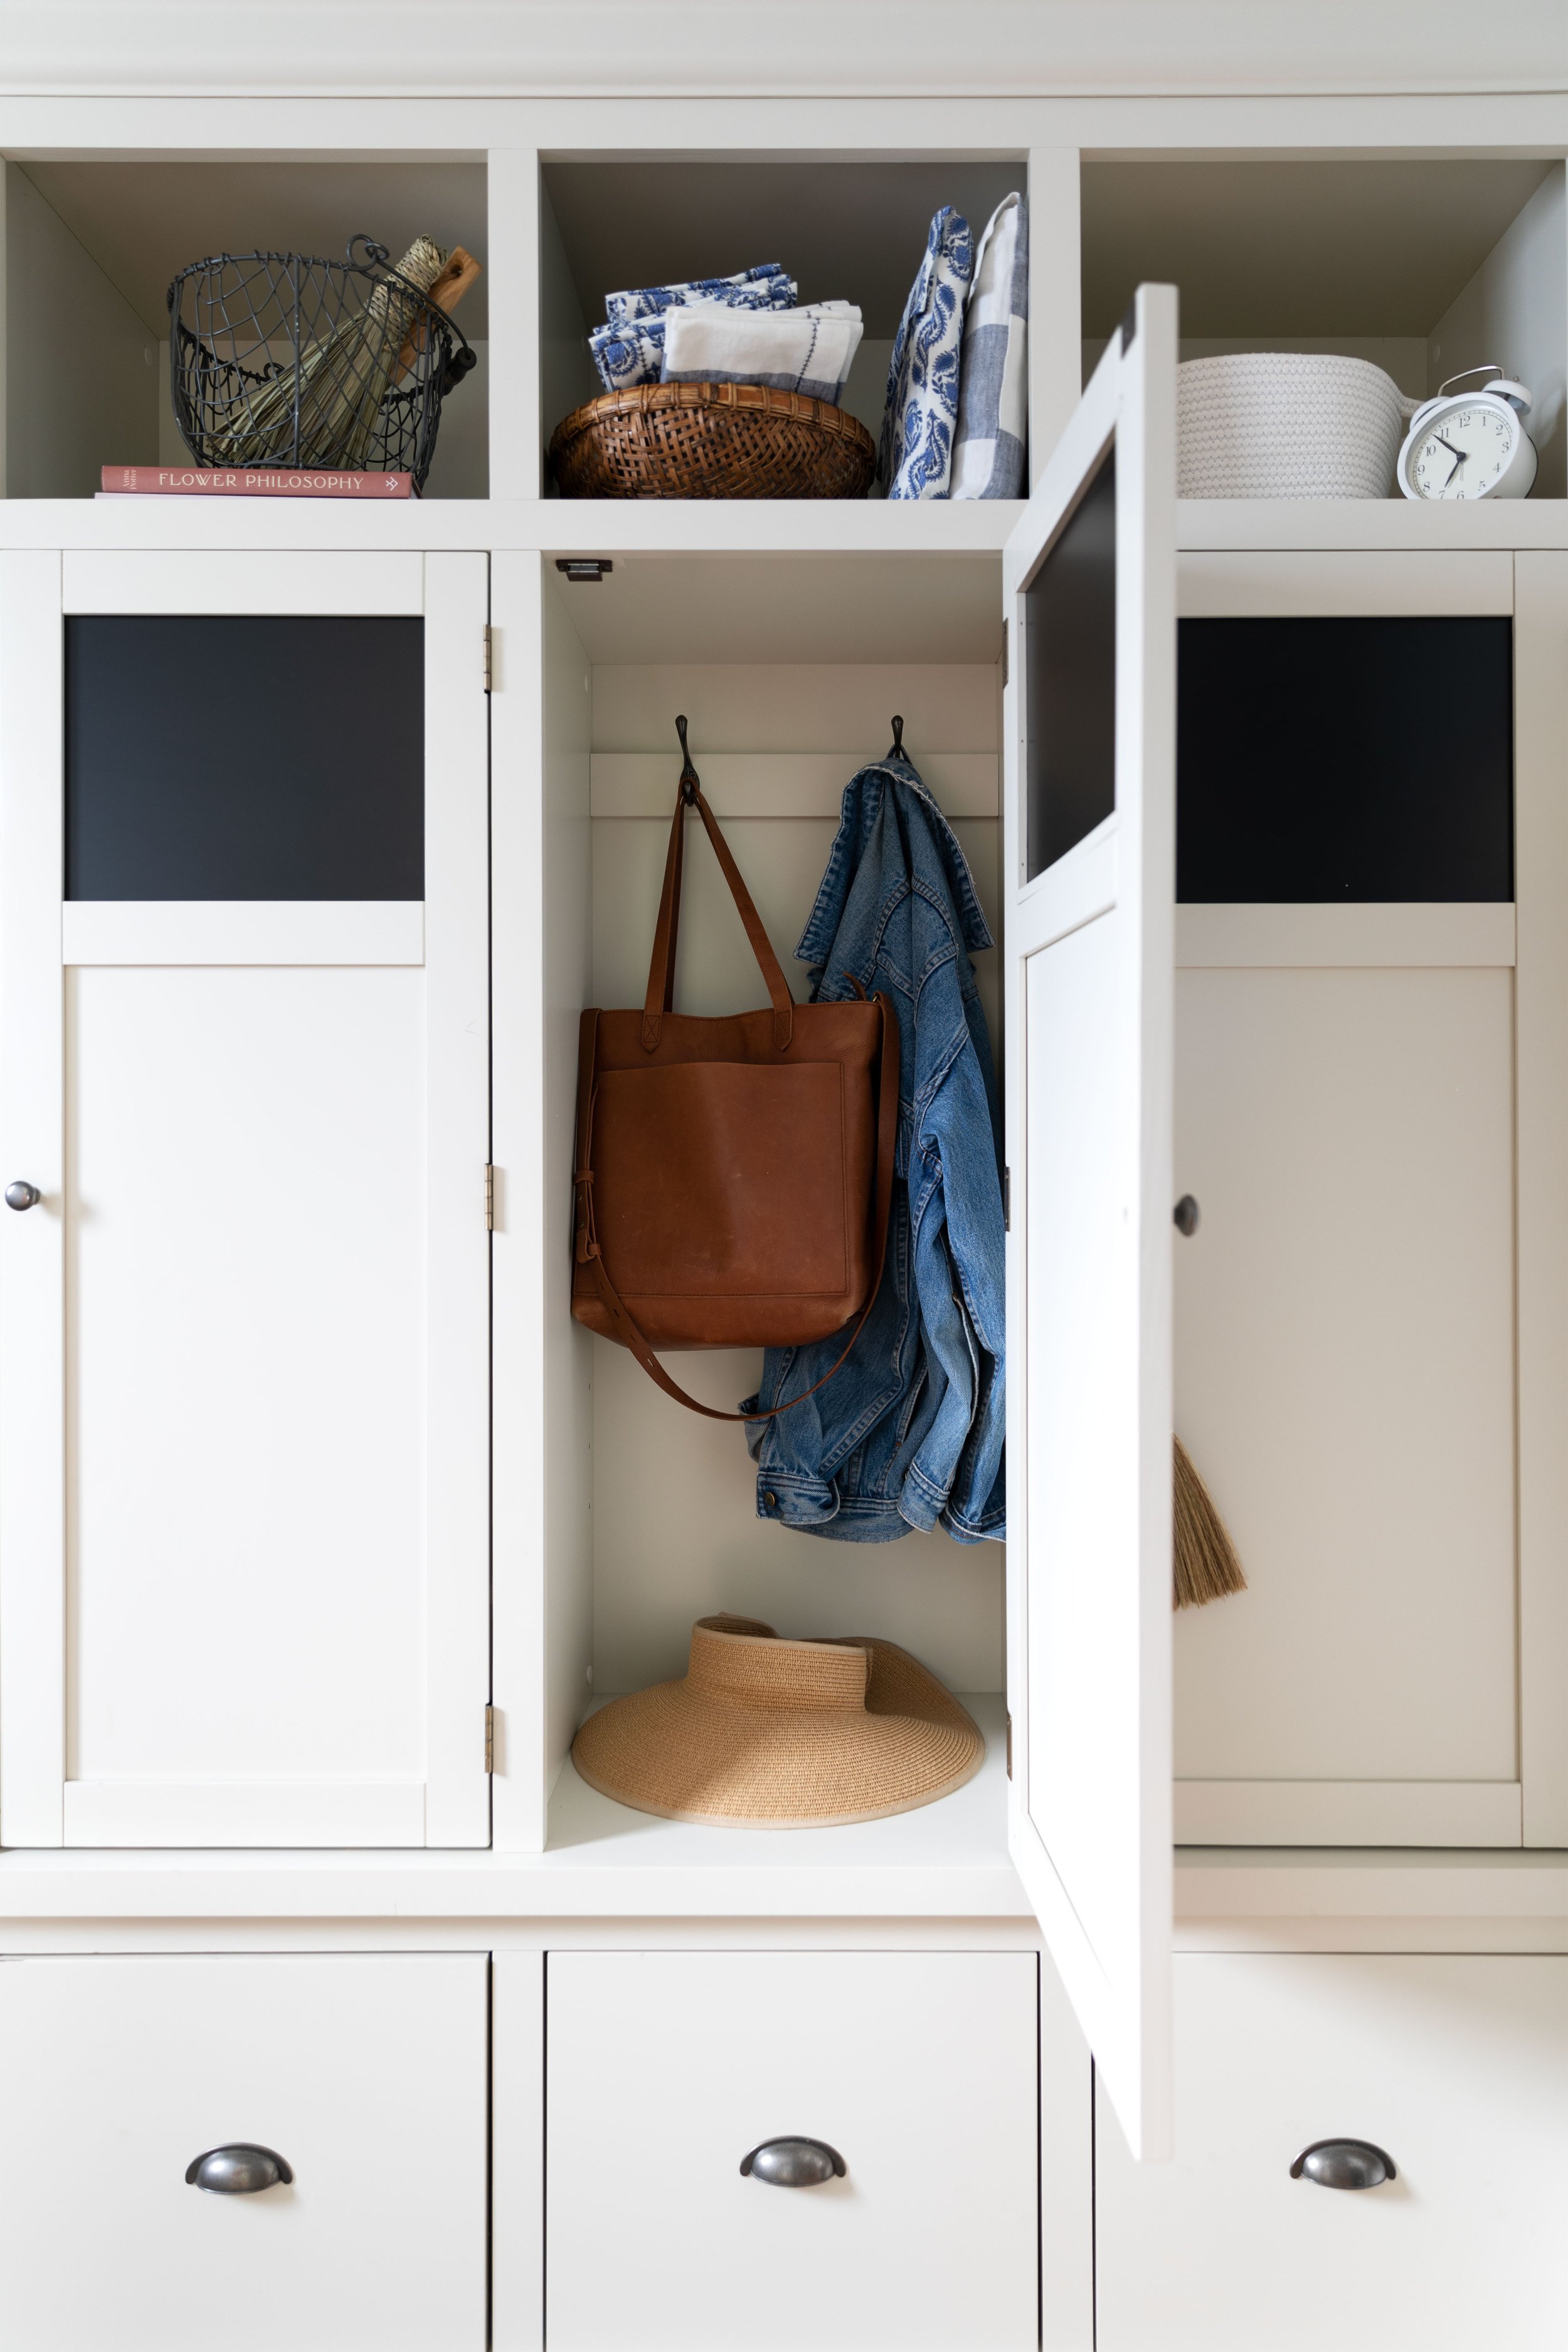 MUD SEASON IN VERMONT: Sharing our 5 favorite mudroom makeovers